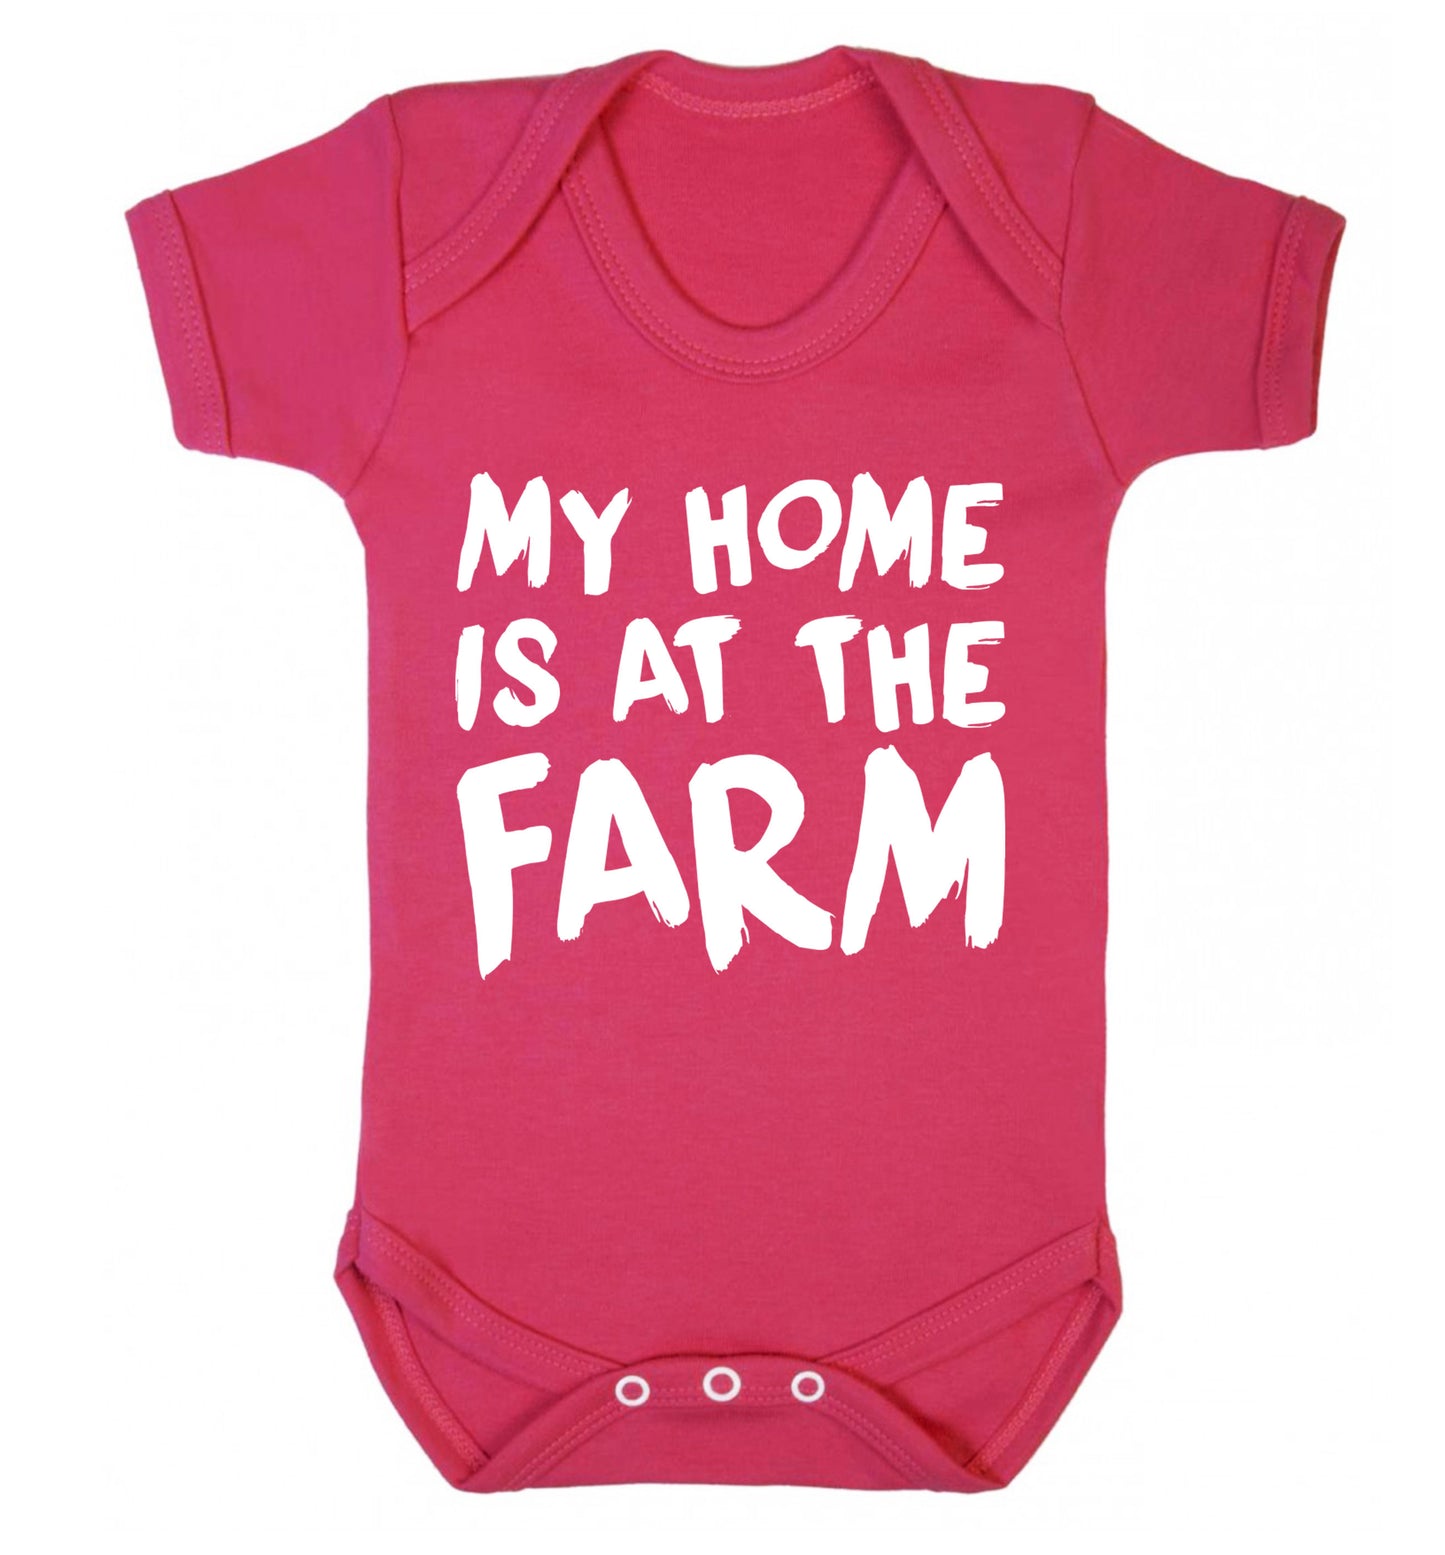 My home is at the farm Baby Vest dark pink 18-24 months